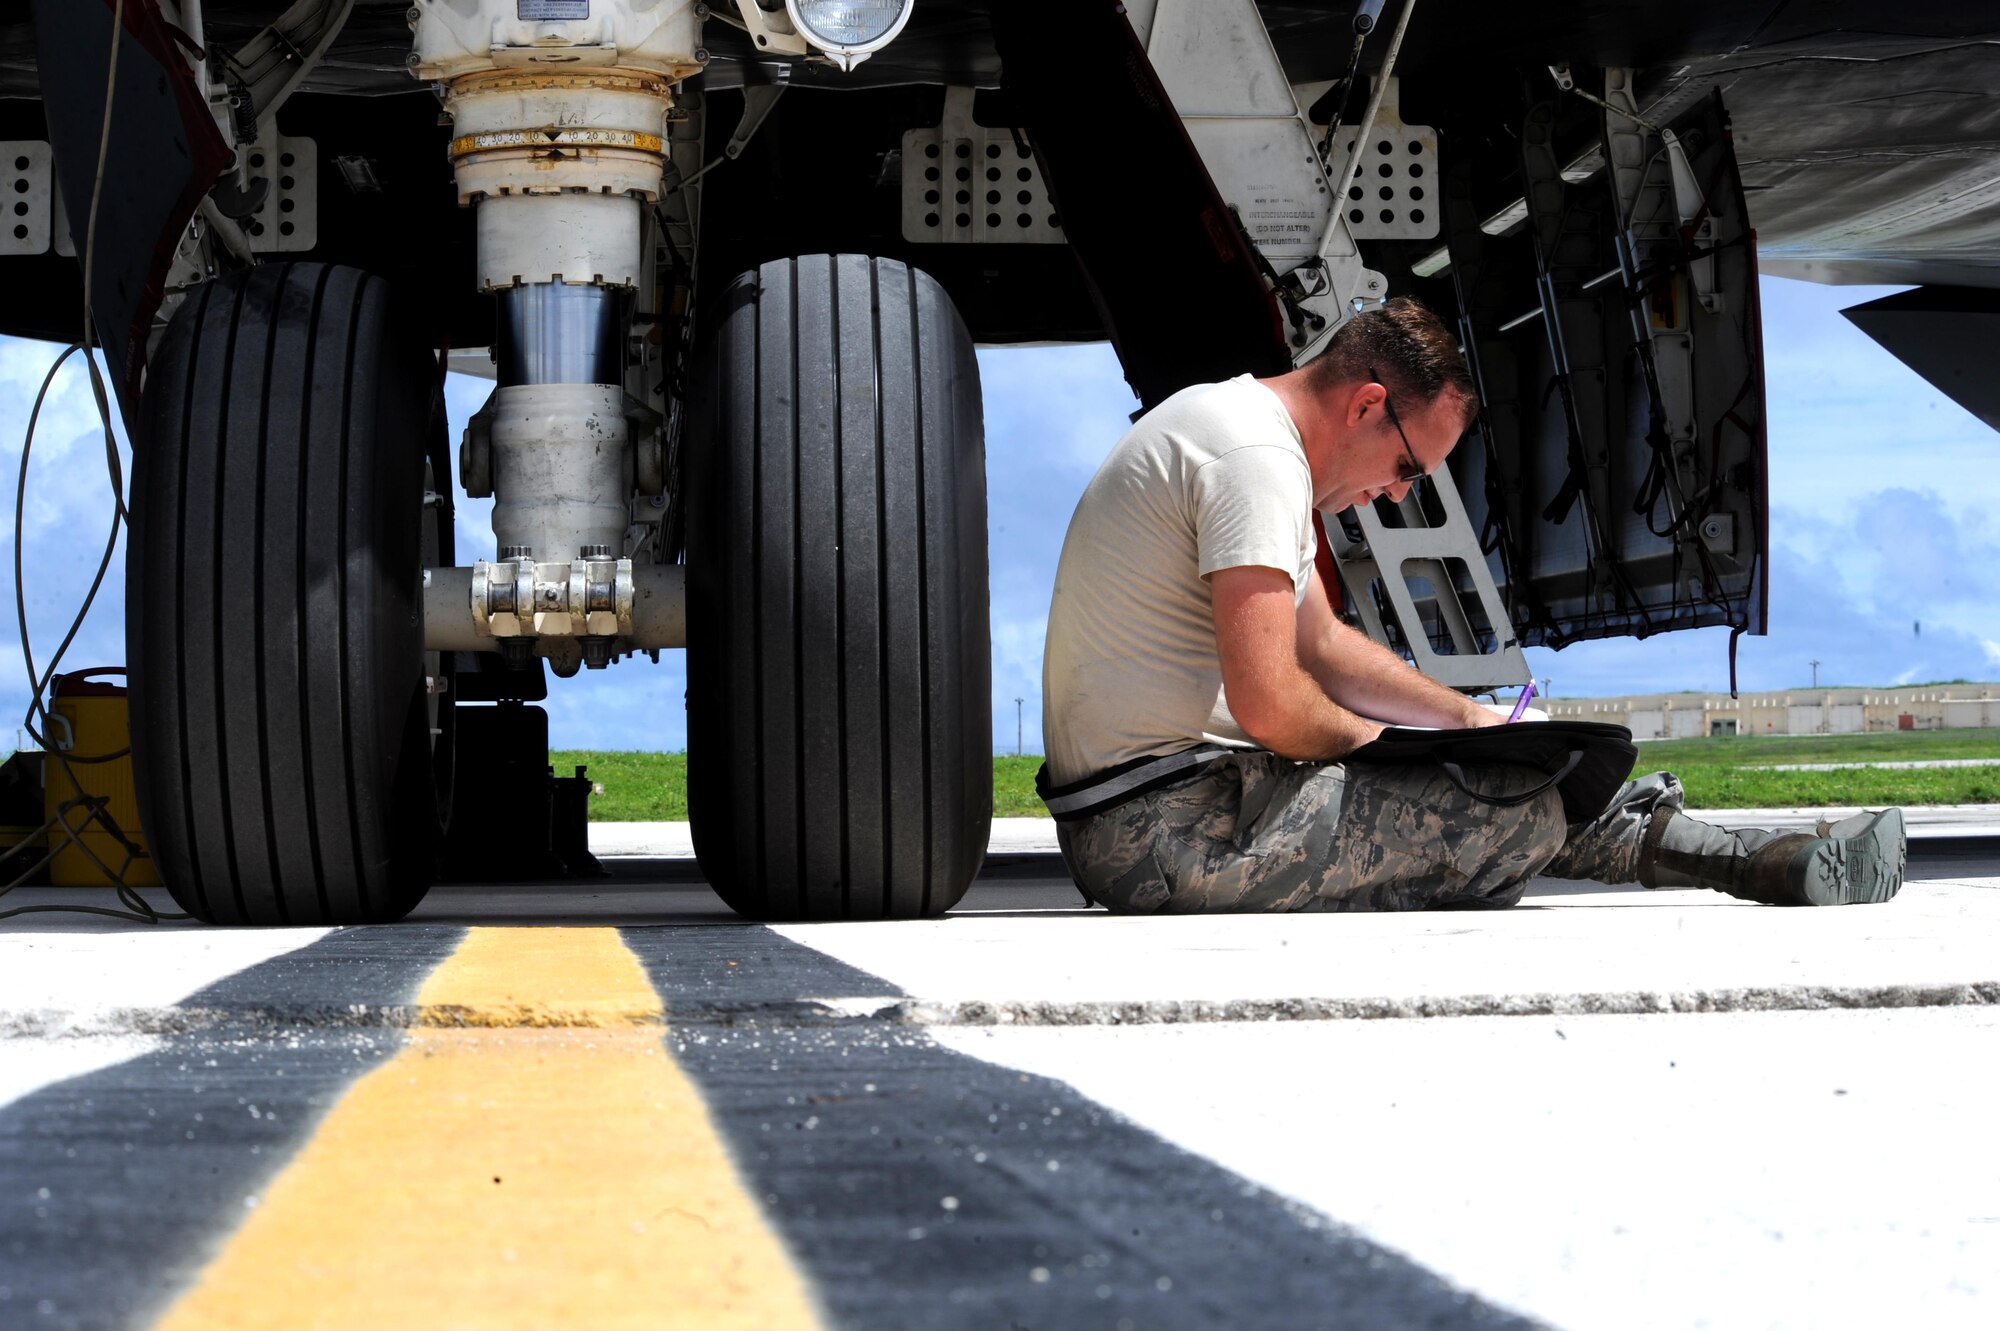 U.S. Air Force Staff Sgt. Kory Stanton, a dedicated crew chief assigned to the 509th Aircraft Maintenance Squadron from Whiteman Air Force Base, Mo., reviews forms during pre-flight checks at Andersen Air Force Base, Guam, Aug. 10, 2016. These bomber missions strengthen capabilities by familiarizing aircrew with airbases and operations across the globe. (U.S. Air Force photo by Tech. Sgt. Miguel Lara III)